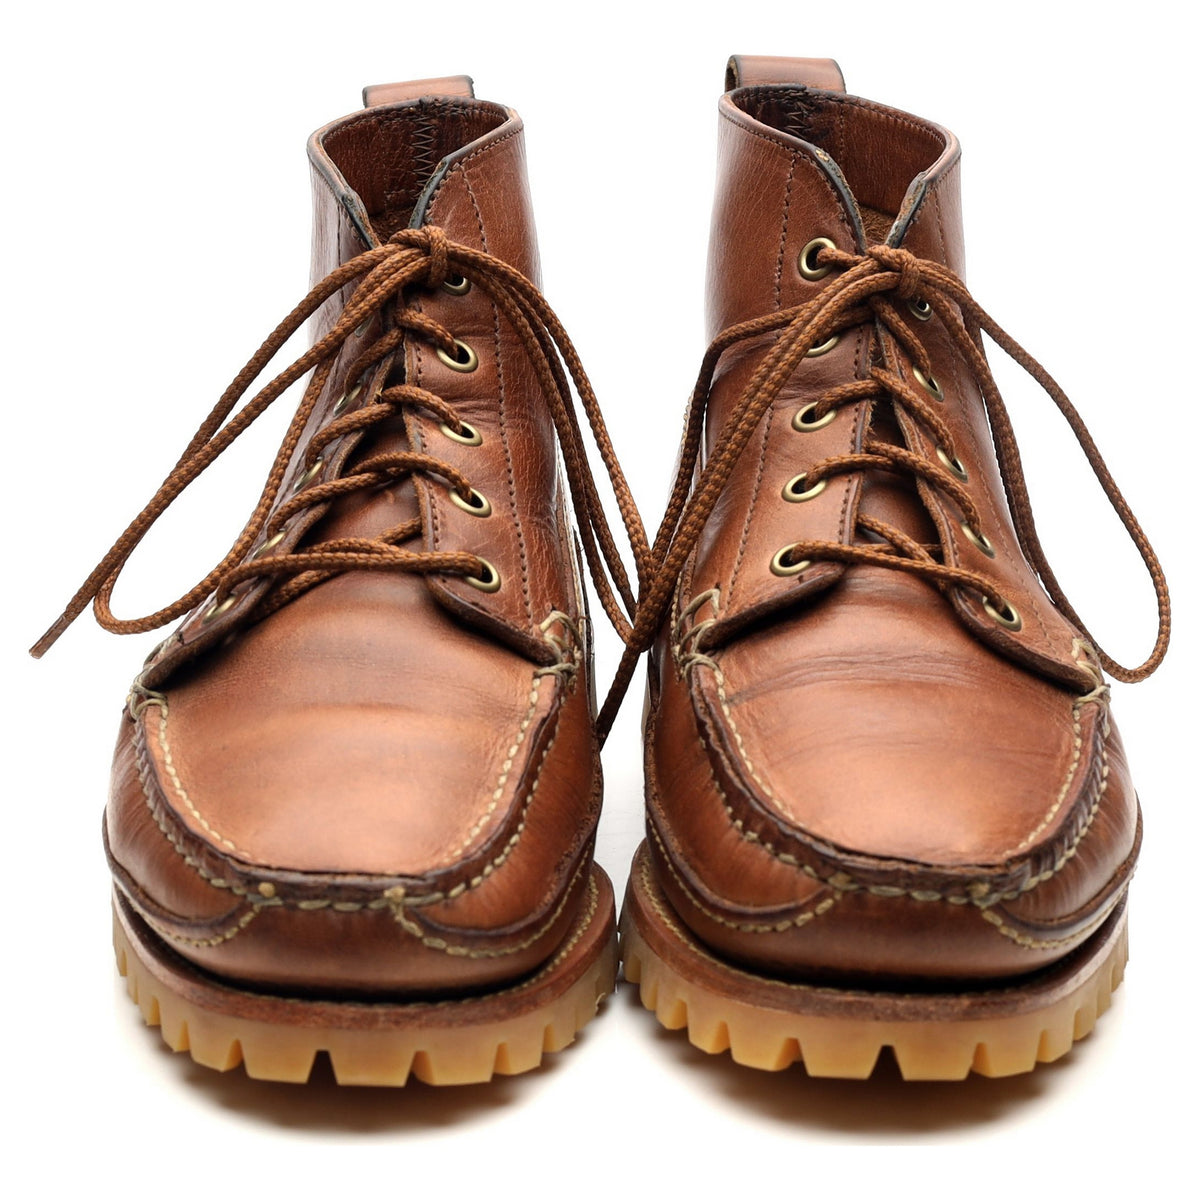 Brown Leather Camp Boots UK 9 US 9.5 D